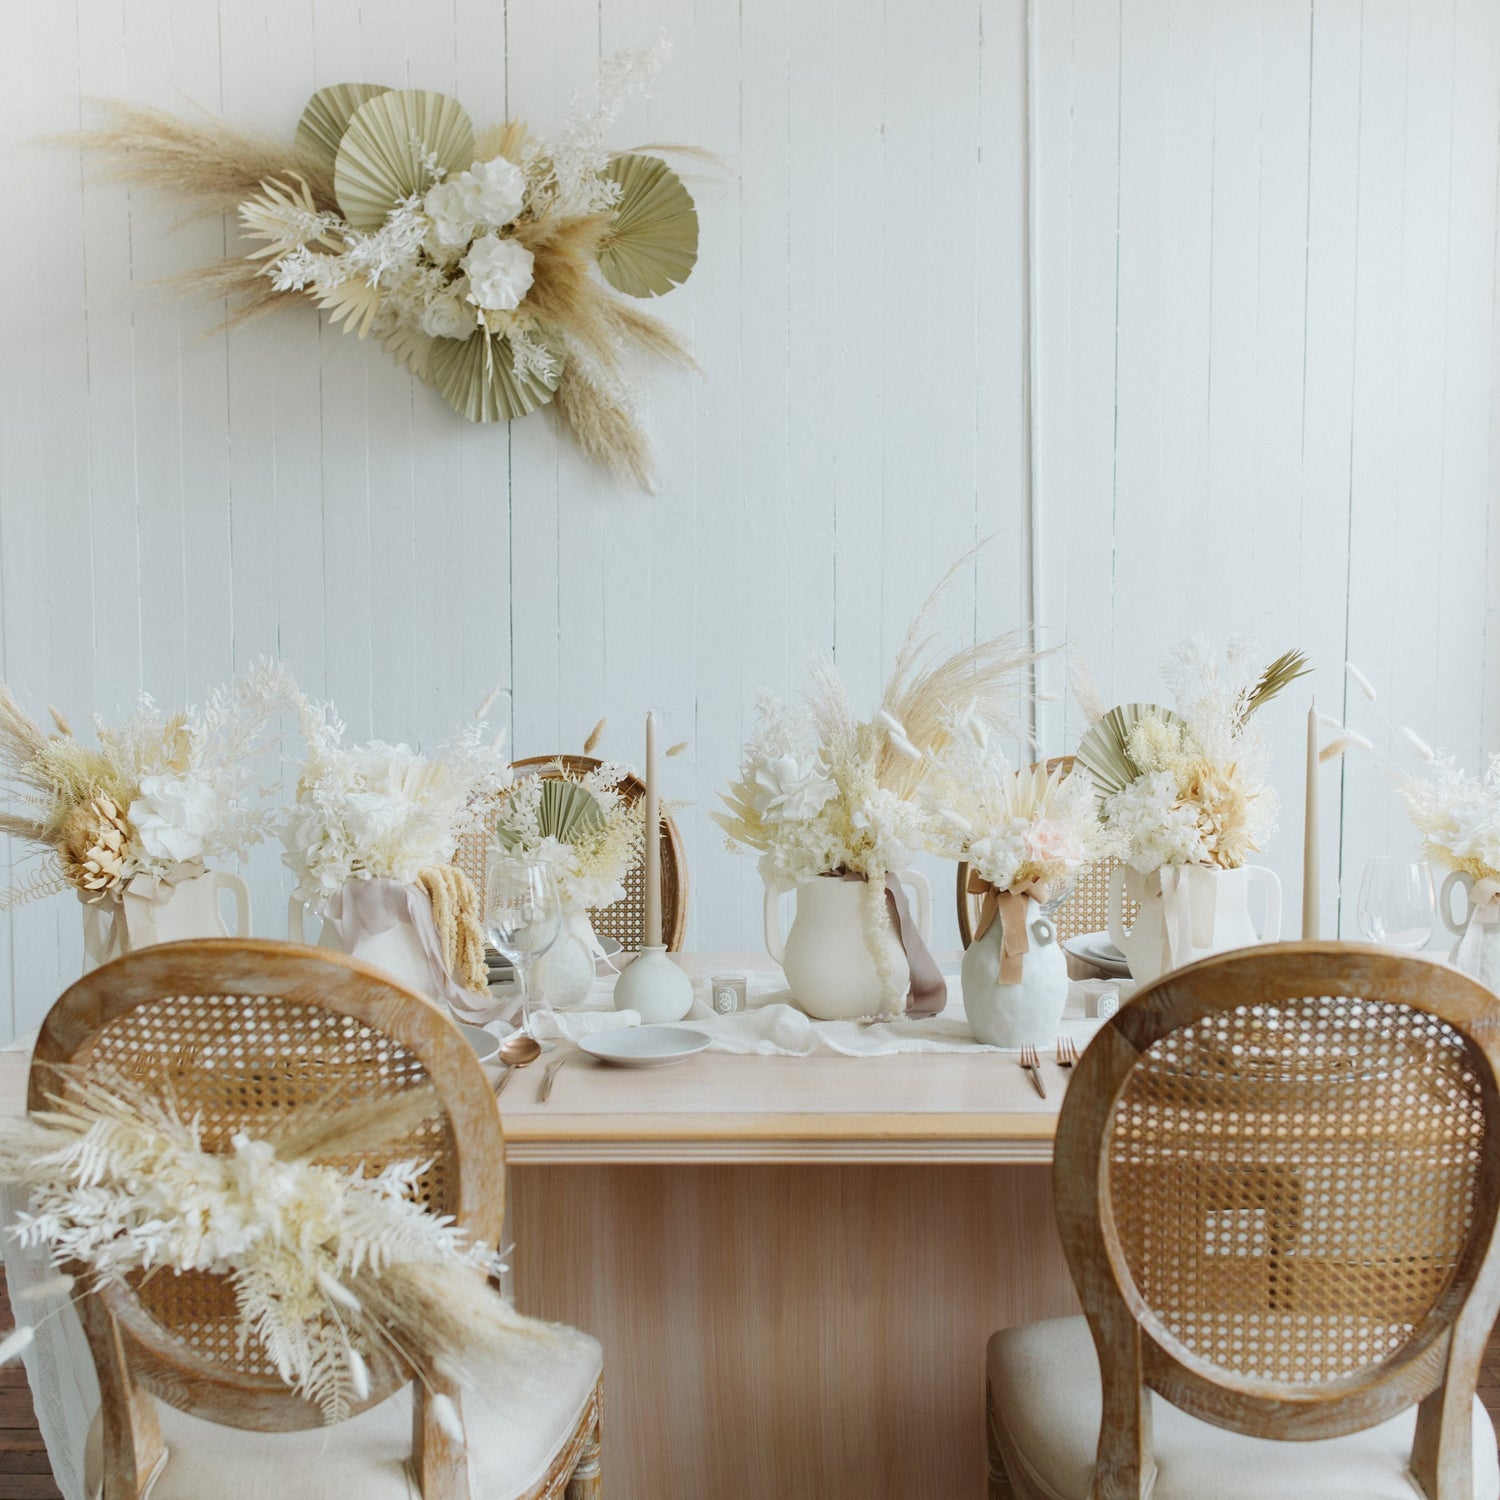 Large dried wedding floral installation available at Rook & Rose.